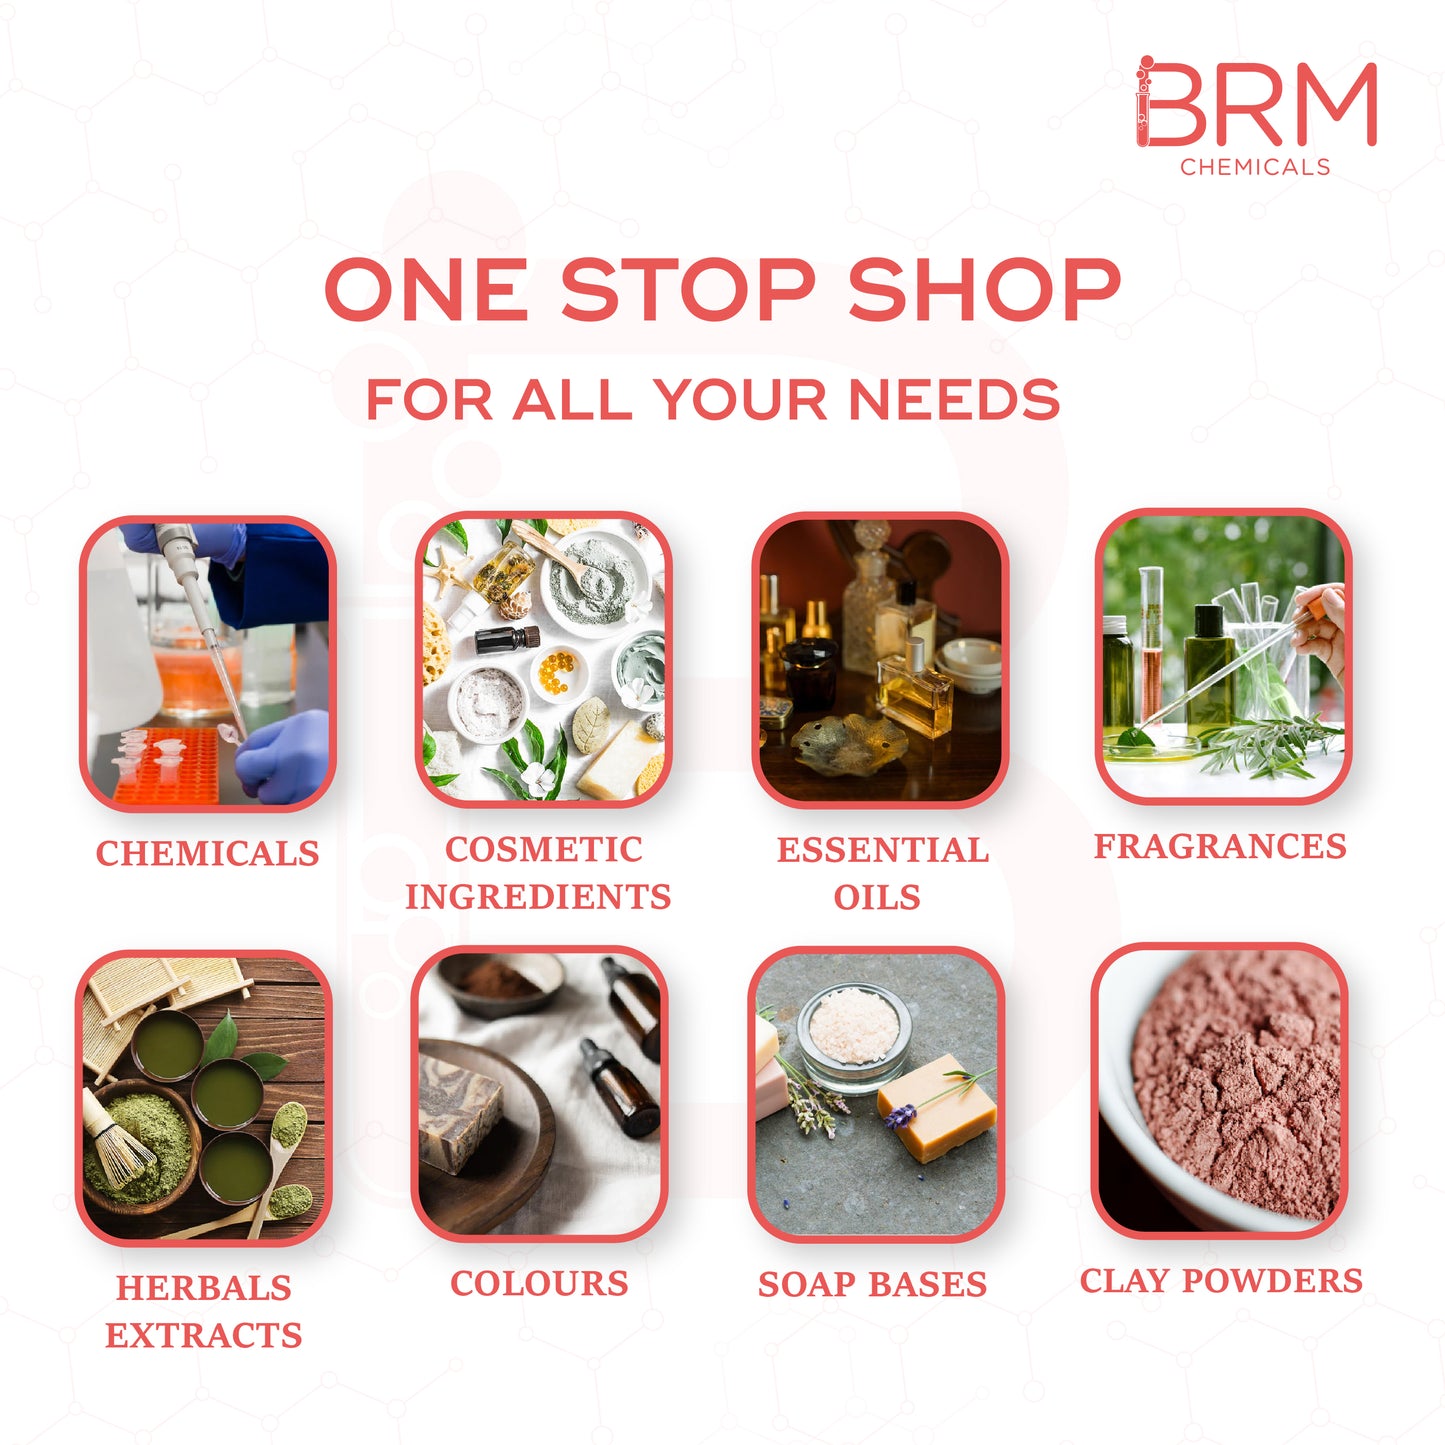 BRM Chemicals' banner for one stop store for chemicals, cosmetic ingredients, essential oils, fragrances, herbals extracts, colours, soap bases, clay powders